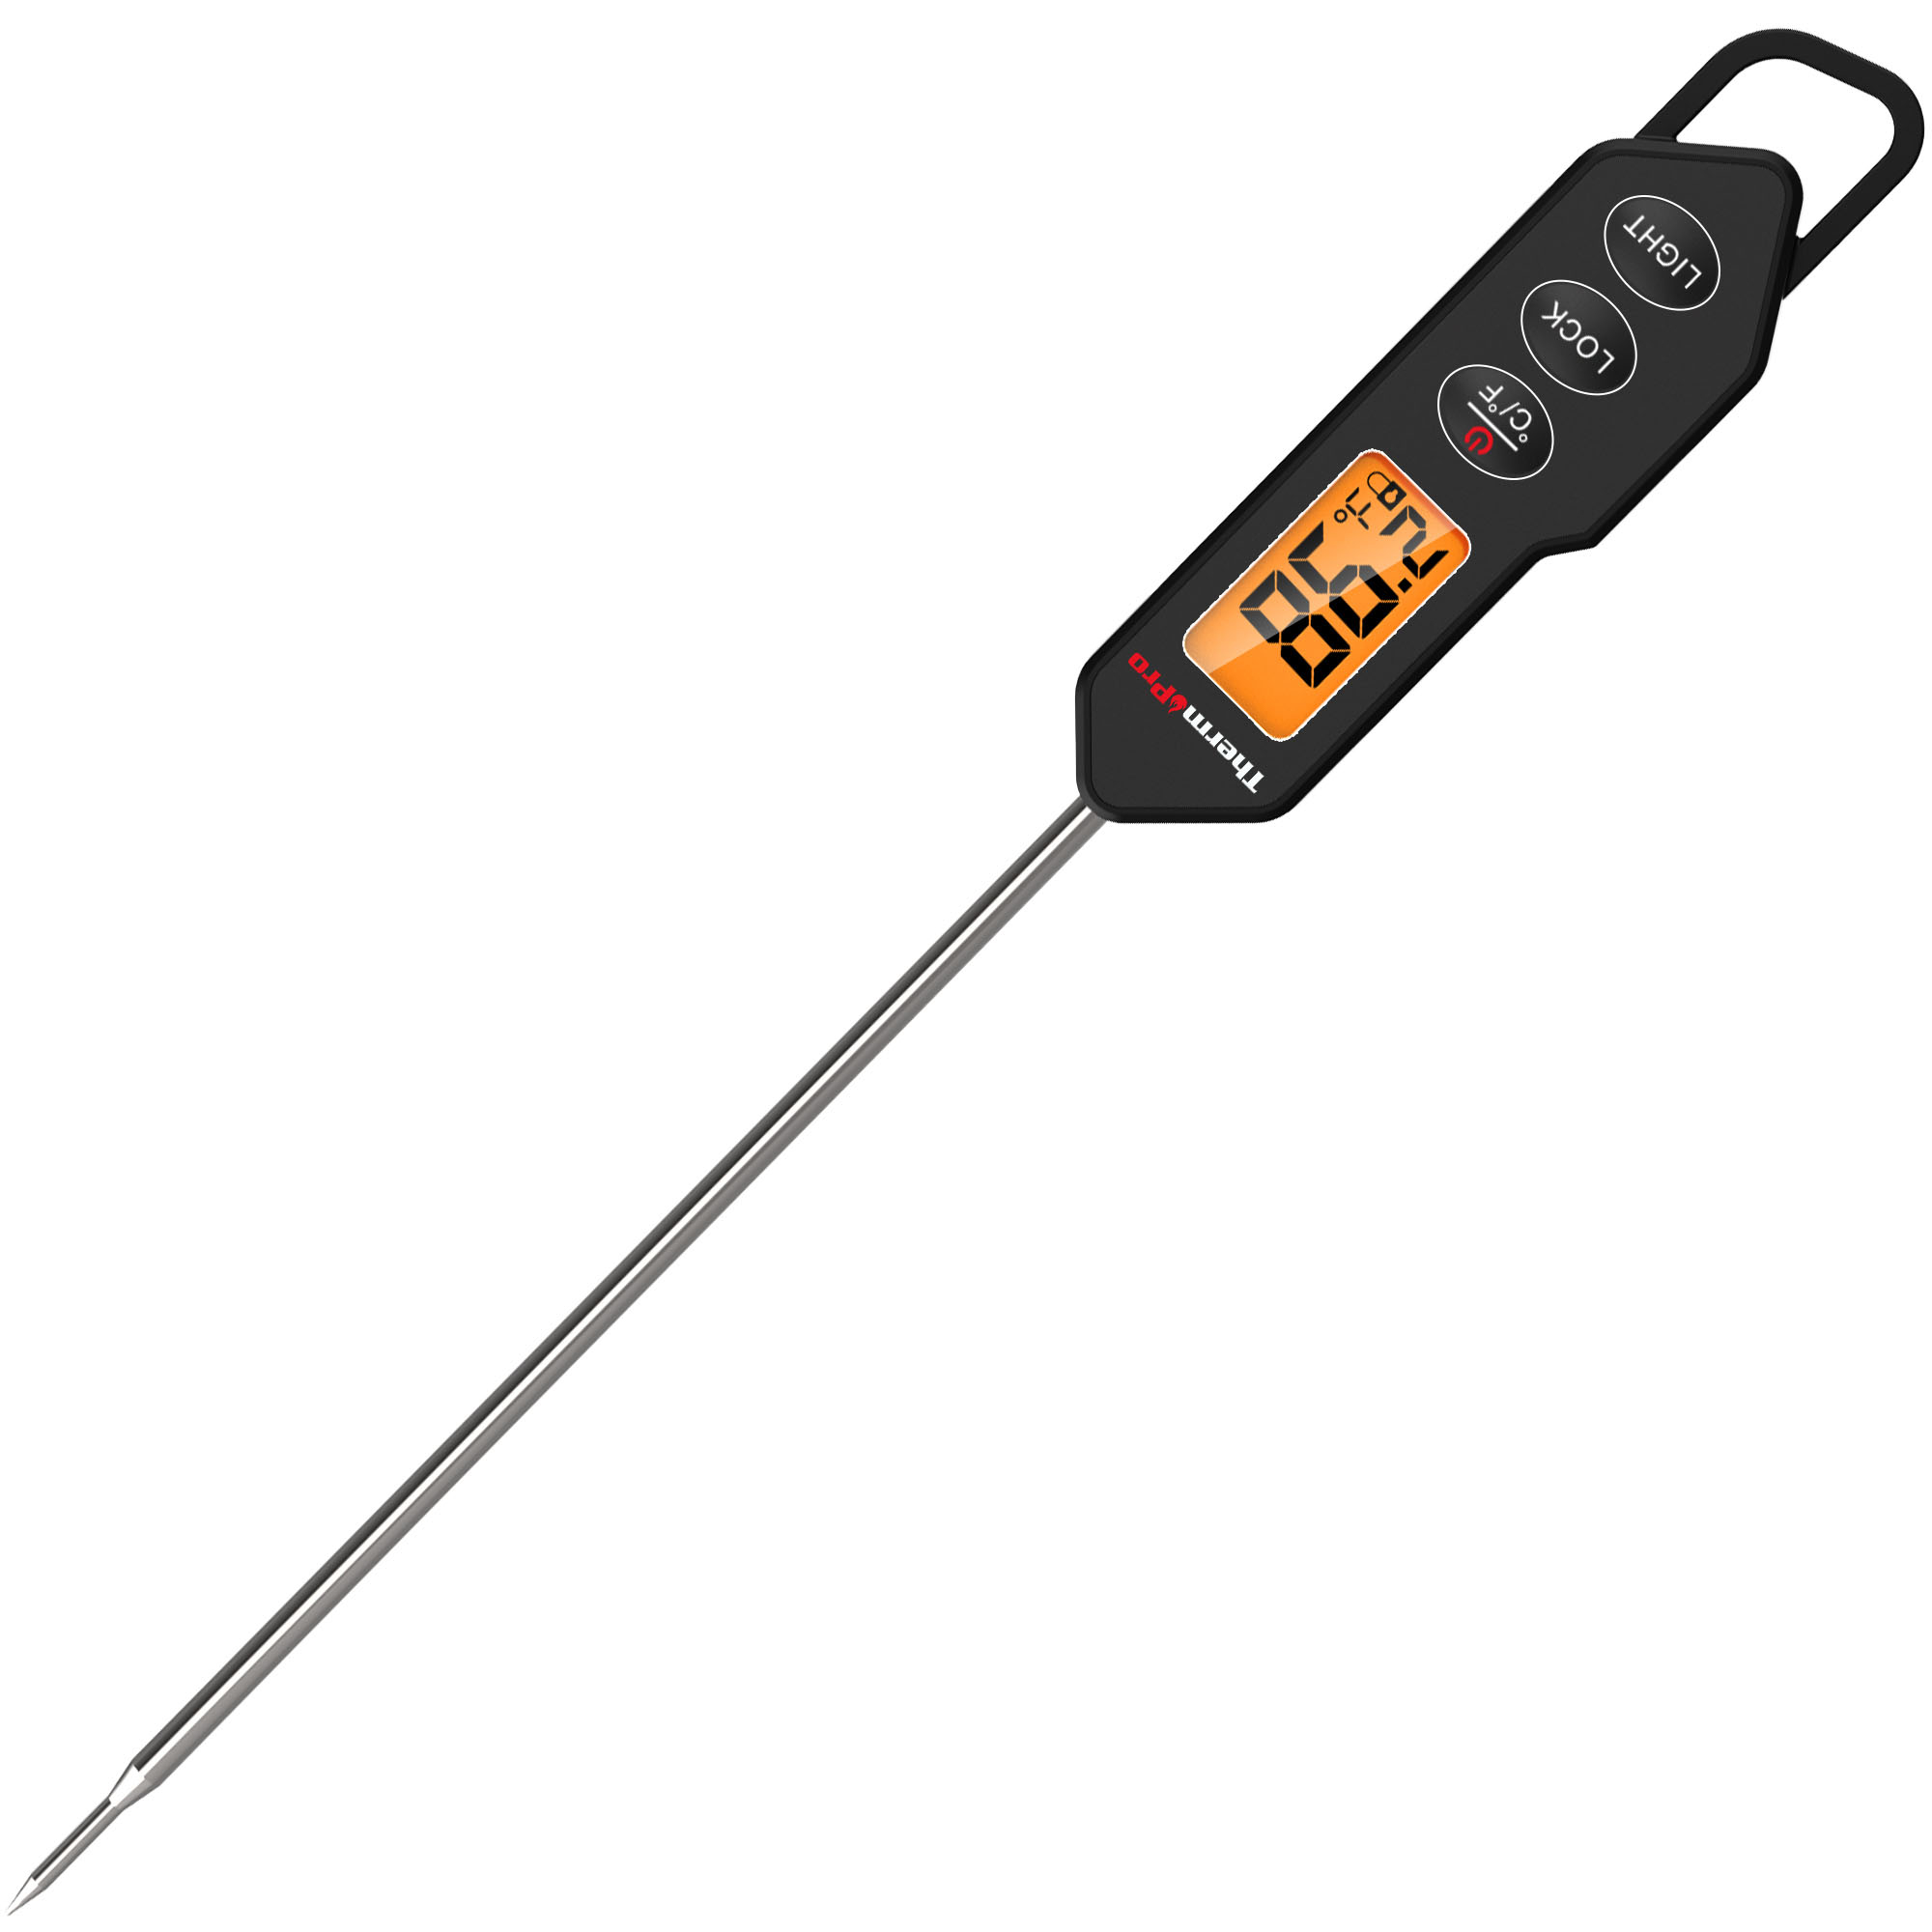 0810012961912 - THERMOPRO - DIGITAL INSTANT-READ MEAT THERMOMETER - BLACK